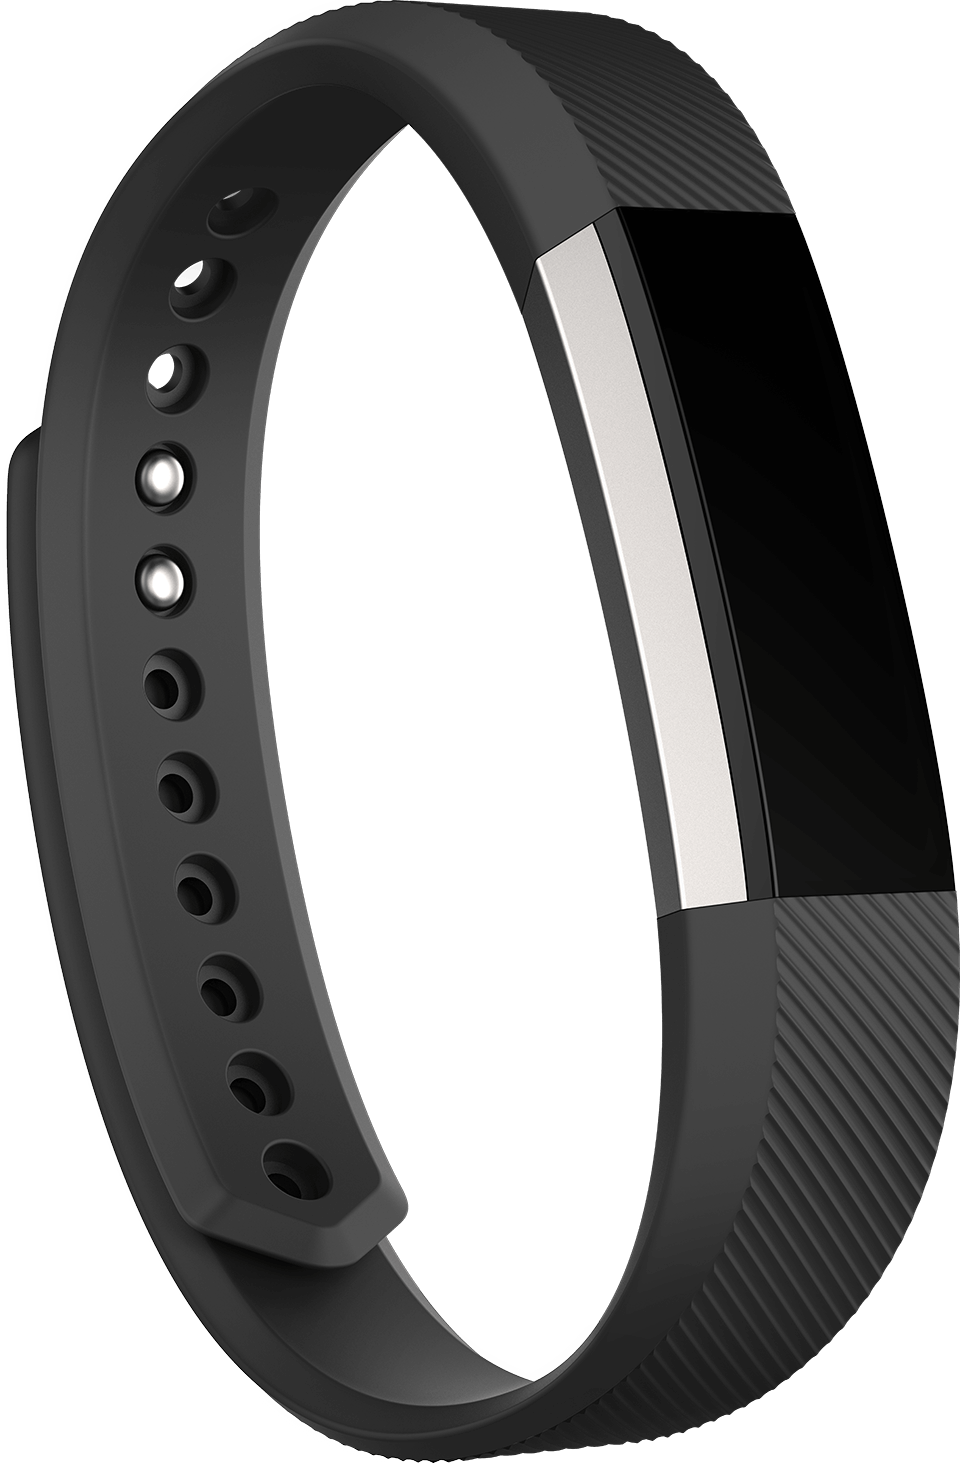 Fitness clipart fitness tracker. Fitbit alta wristband and